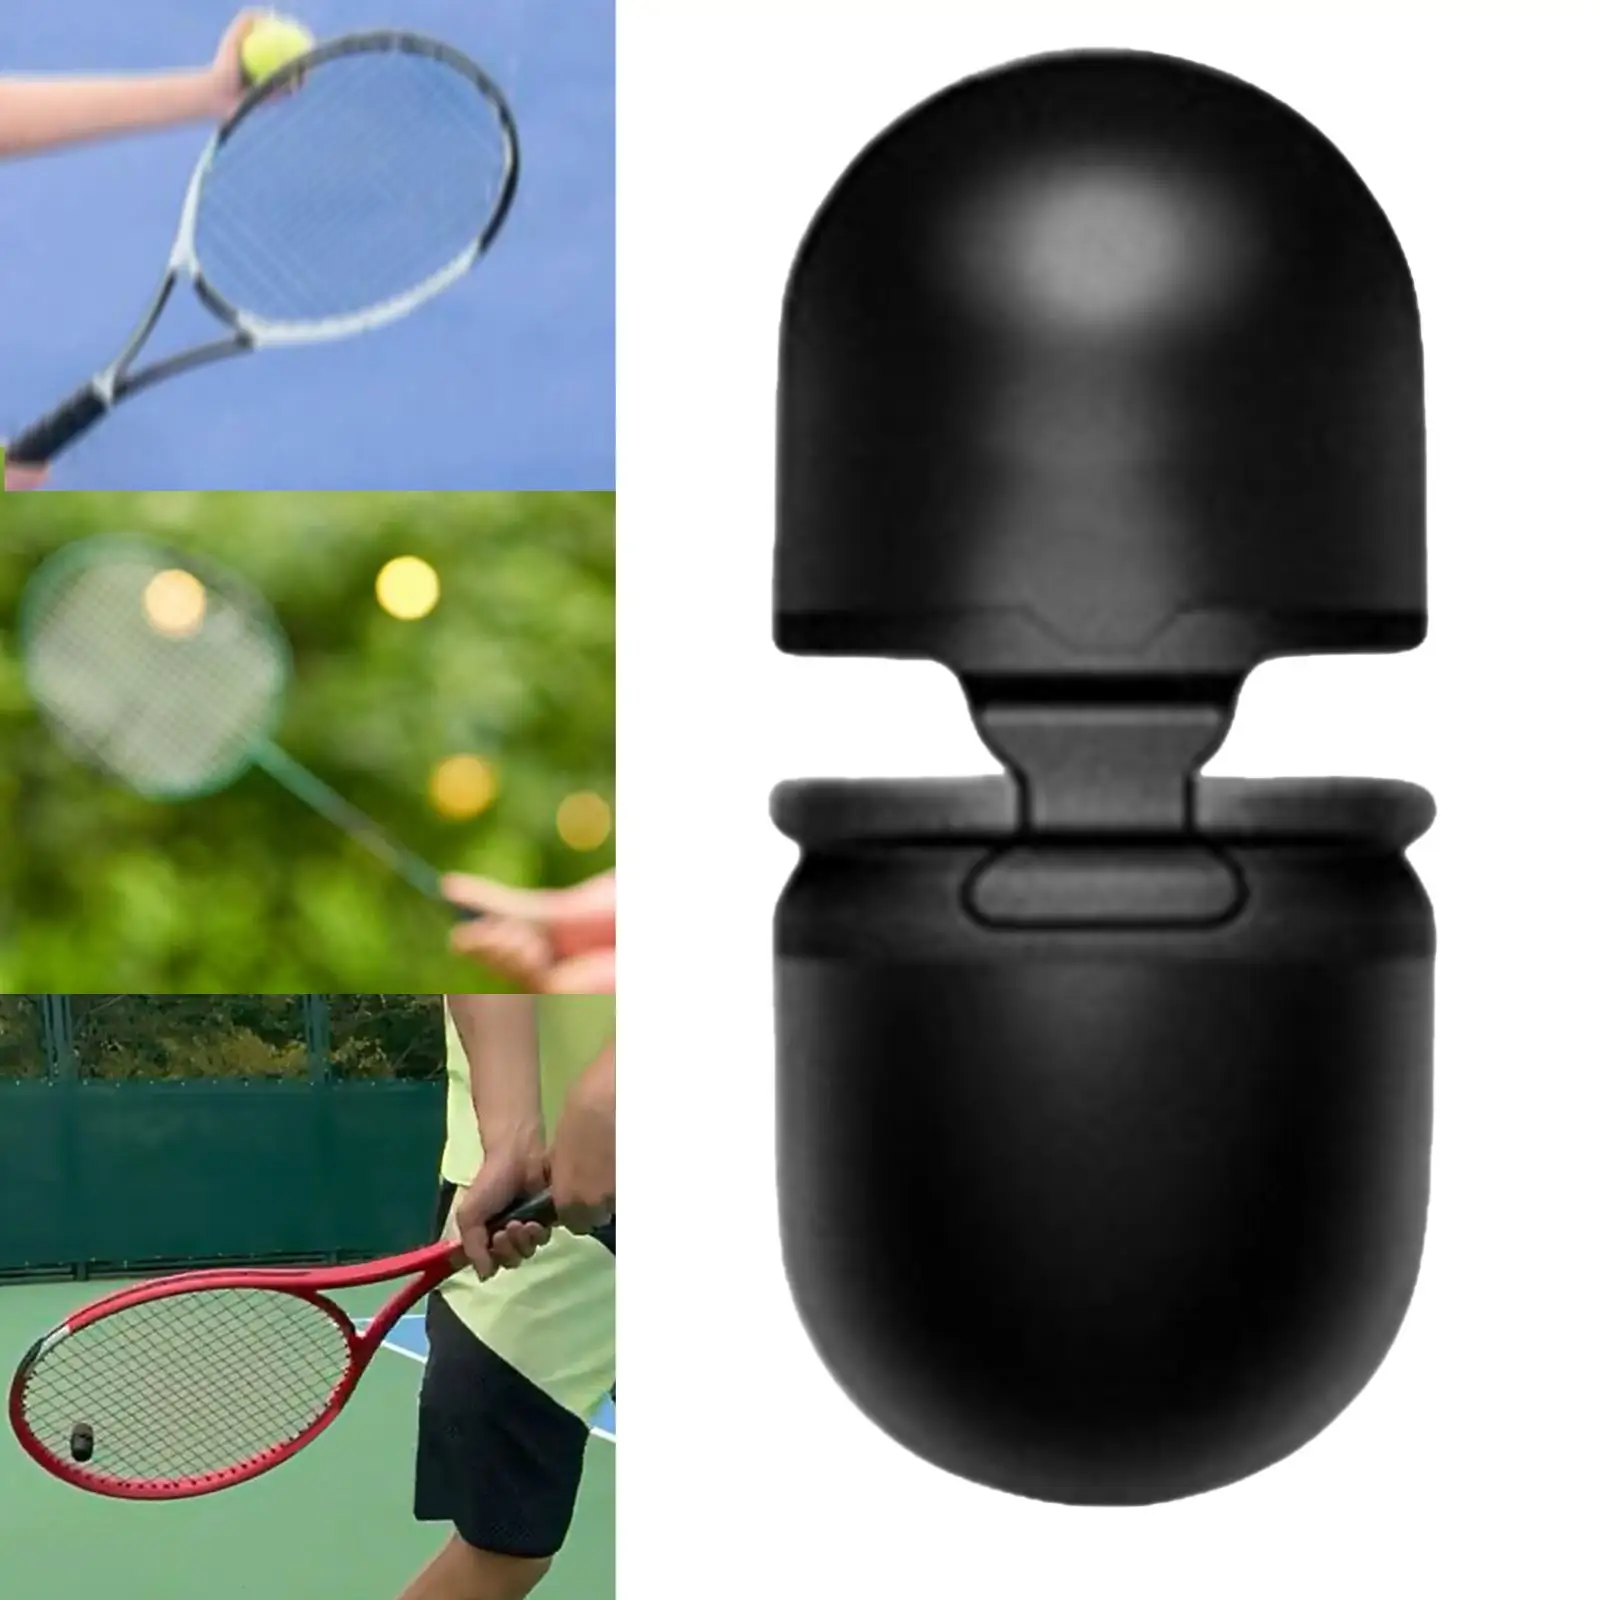 Tennis Topspin Whistle Portable Accessories Sports training aid Training Tool for Adults Kids Players Juniors Beginners Coaches